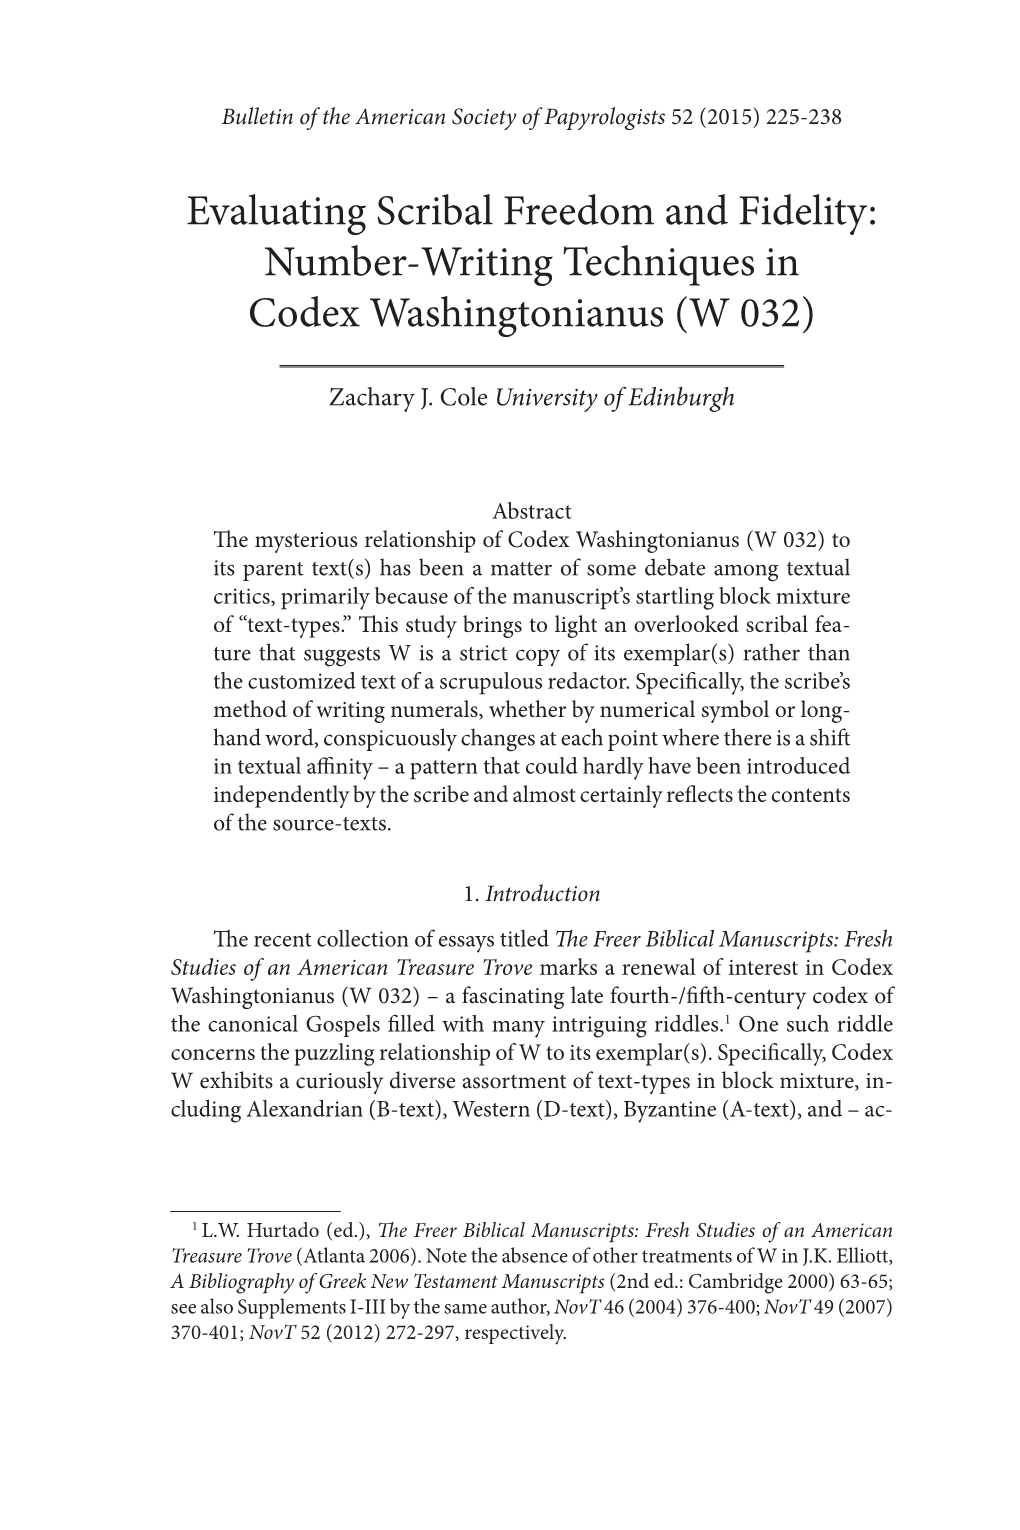 Evaluating Scribal Freedom and Fidelity: Number-Writing Techniques in Codex Washingtonianus (W 032)